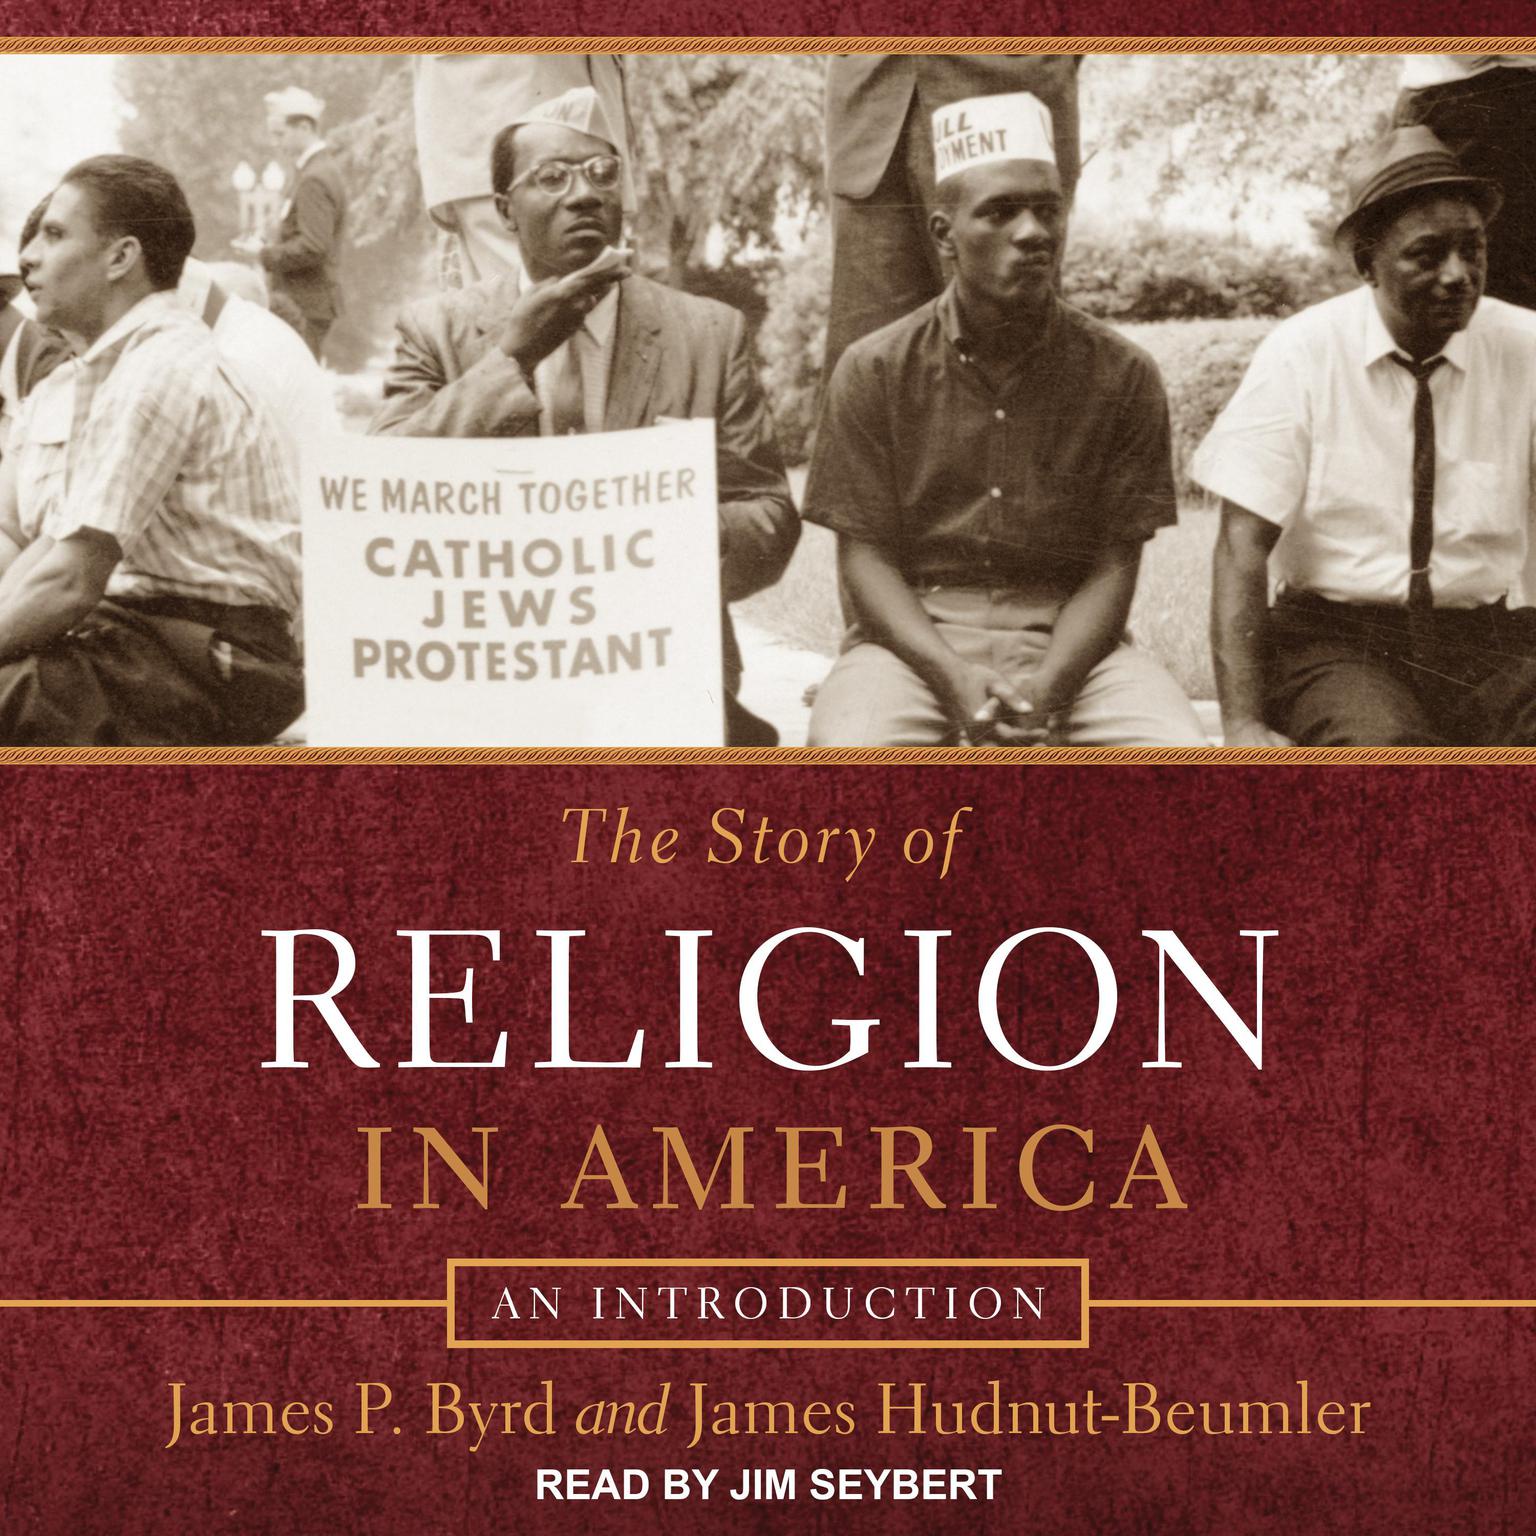 The Story of Religion in America: An Introduction Audiobook, by James P. Byrd